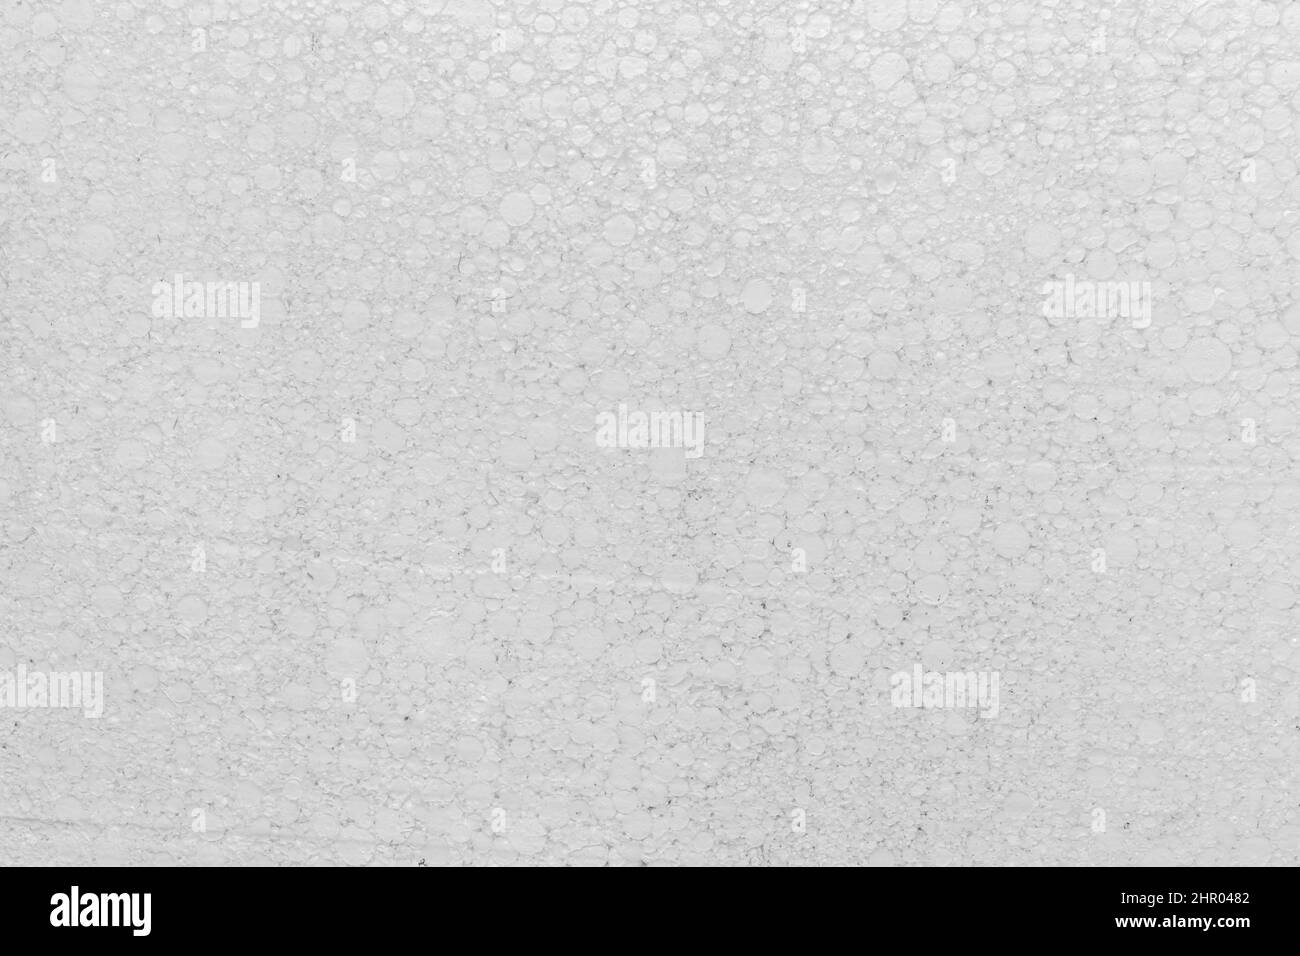 Styrofoam Polystyrene Plasterboard Drywall Foam Building Material Surface White Abstract Wall Texture Background. Stock Photo